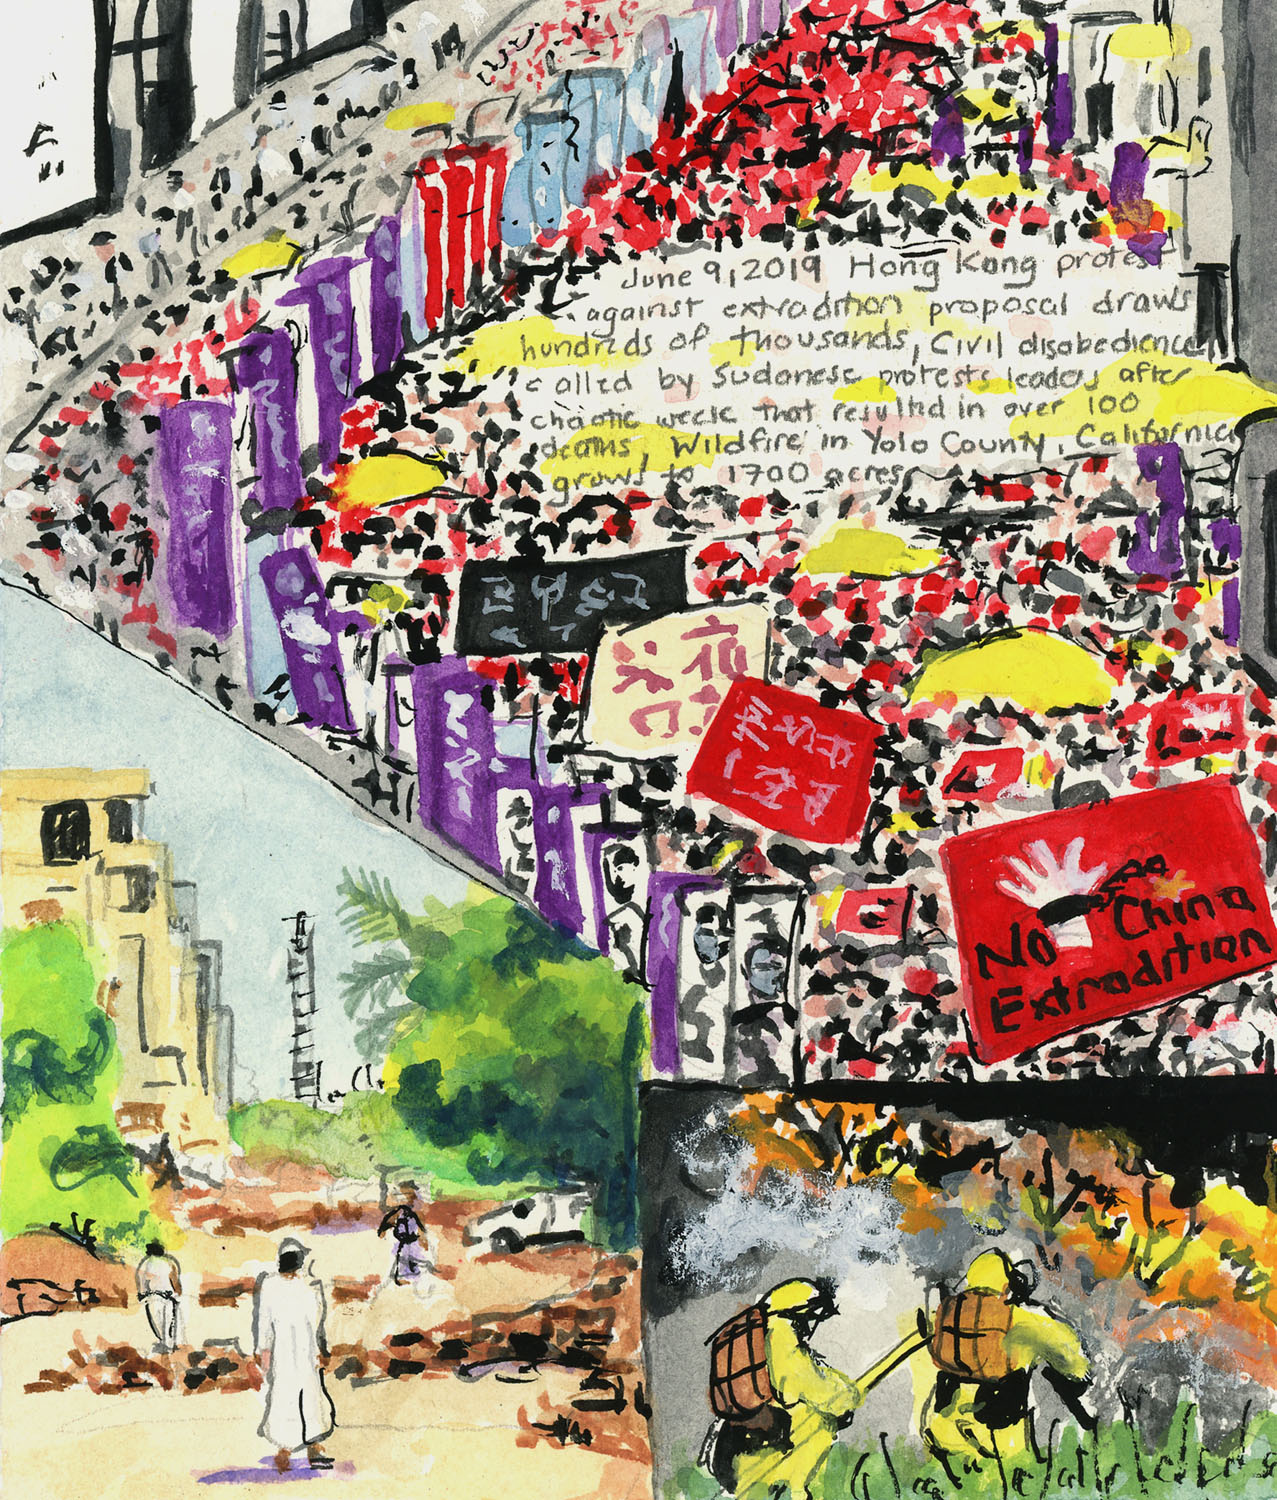 Day 1,296 (June 9, 2019) <br>Casein, gouache, Watercolor, graphite on paper, 7 x 6 in.<br><i>Hong Kong protest against extradition proposal draws hundreds of thousands, Civil disobedience called by Sudanese protest leaders after chaotic week that resulted in over 100 deaths, Wildfire in Yolo County, California grows to 1700 acres.</i>